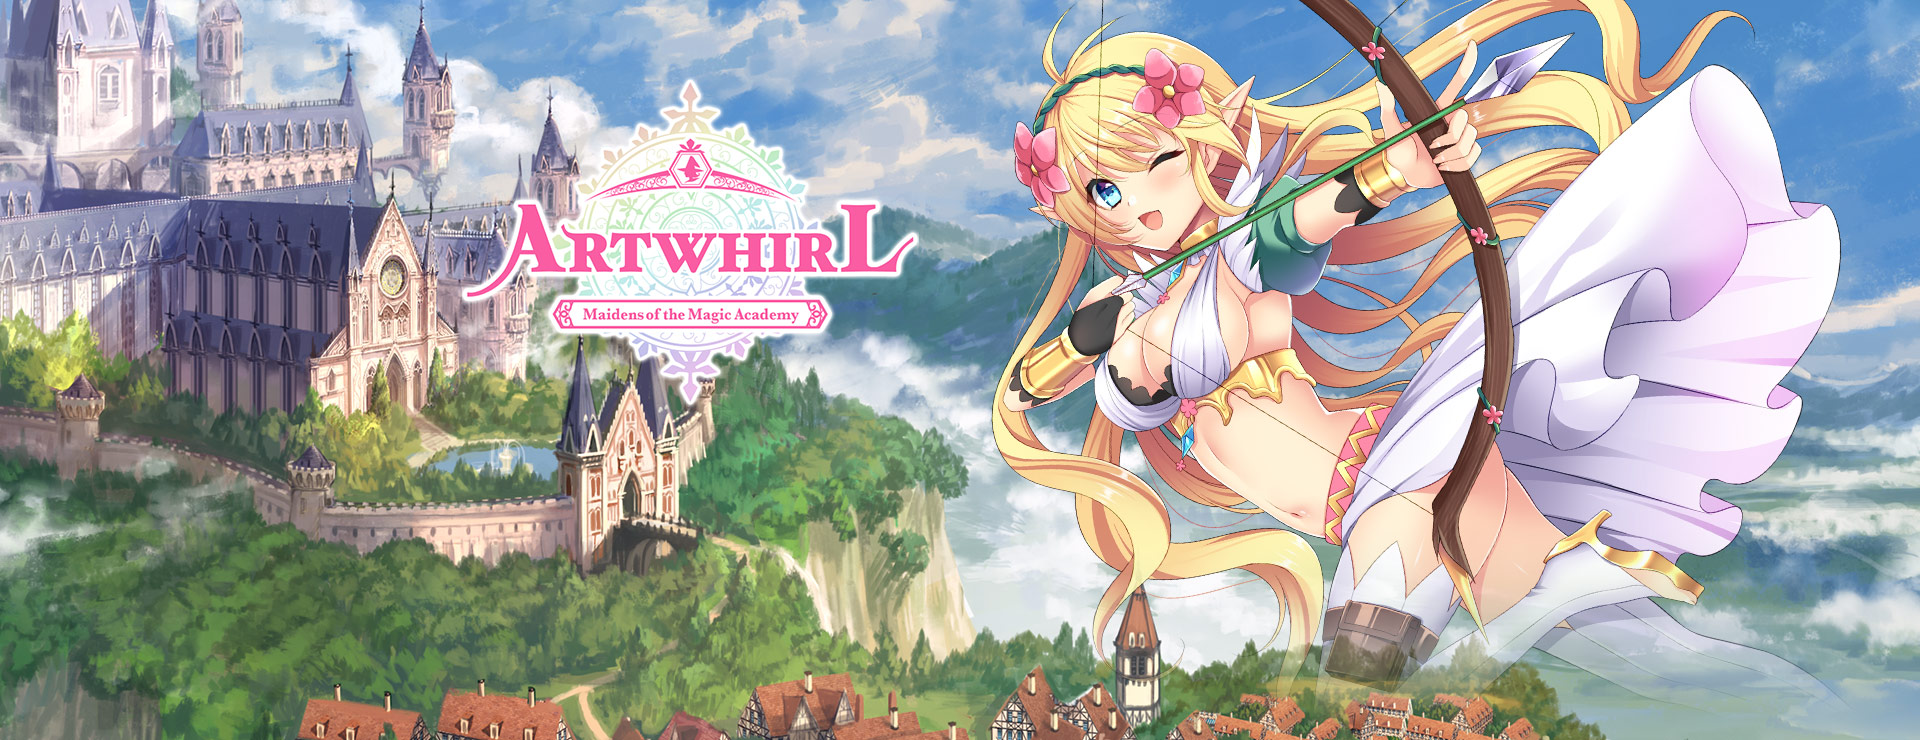 Artwhirl -Maidens of the Magic Academy- - RPG Spiel